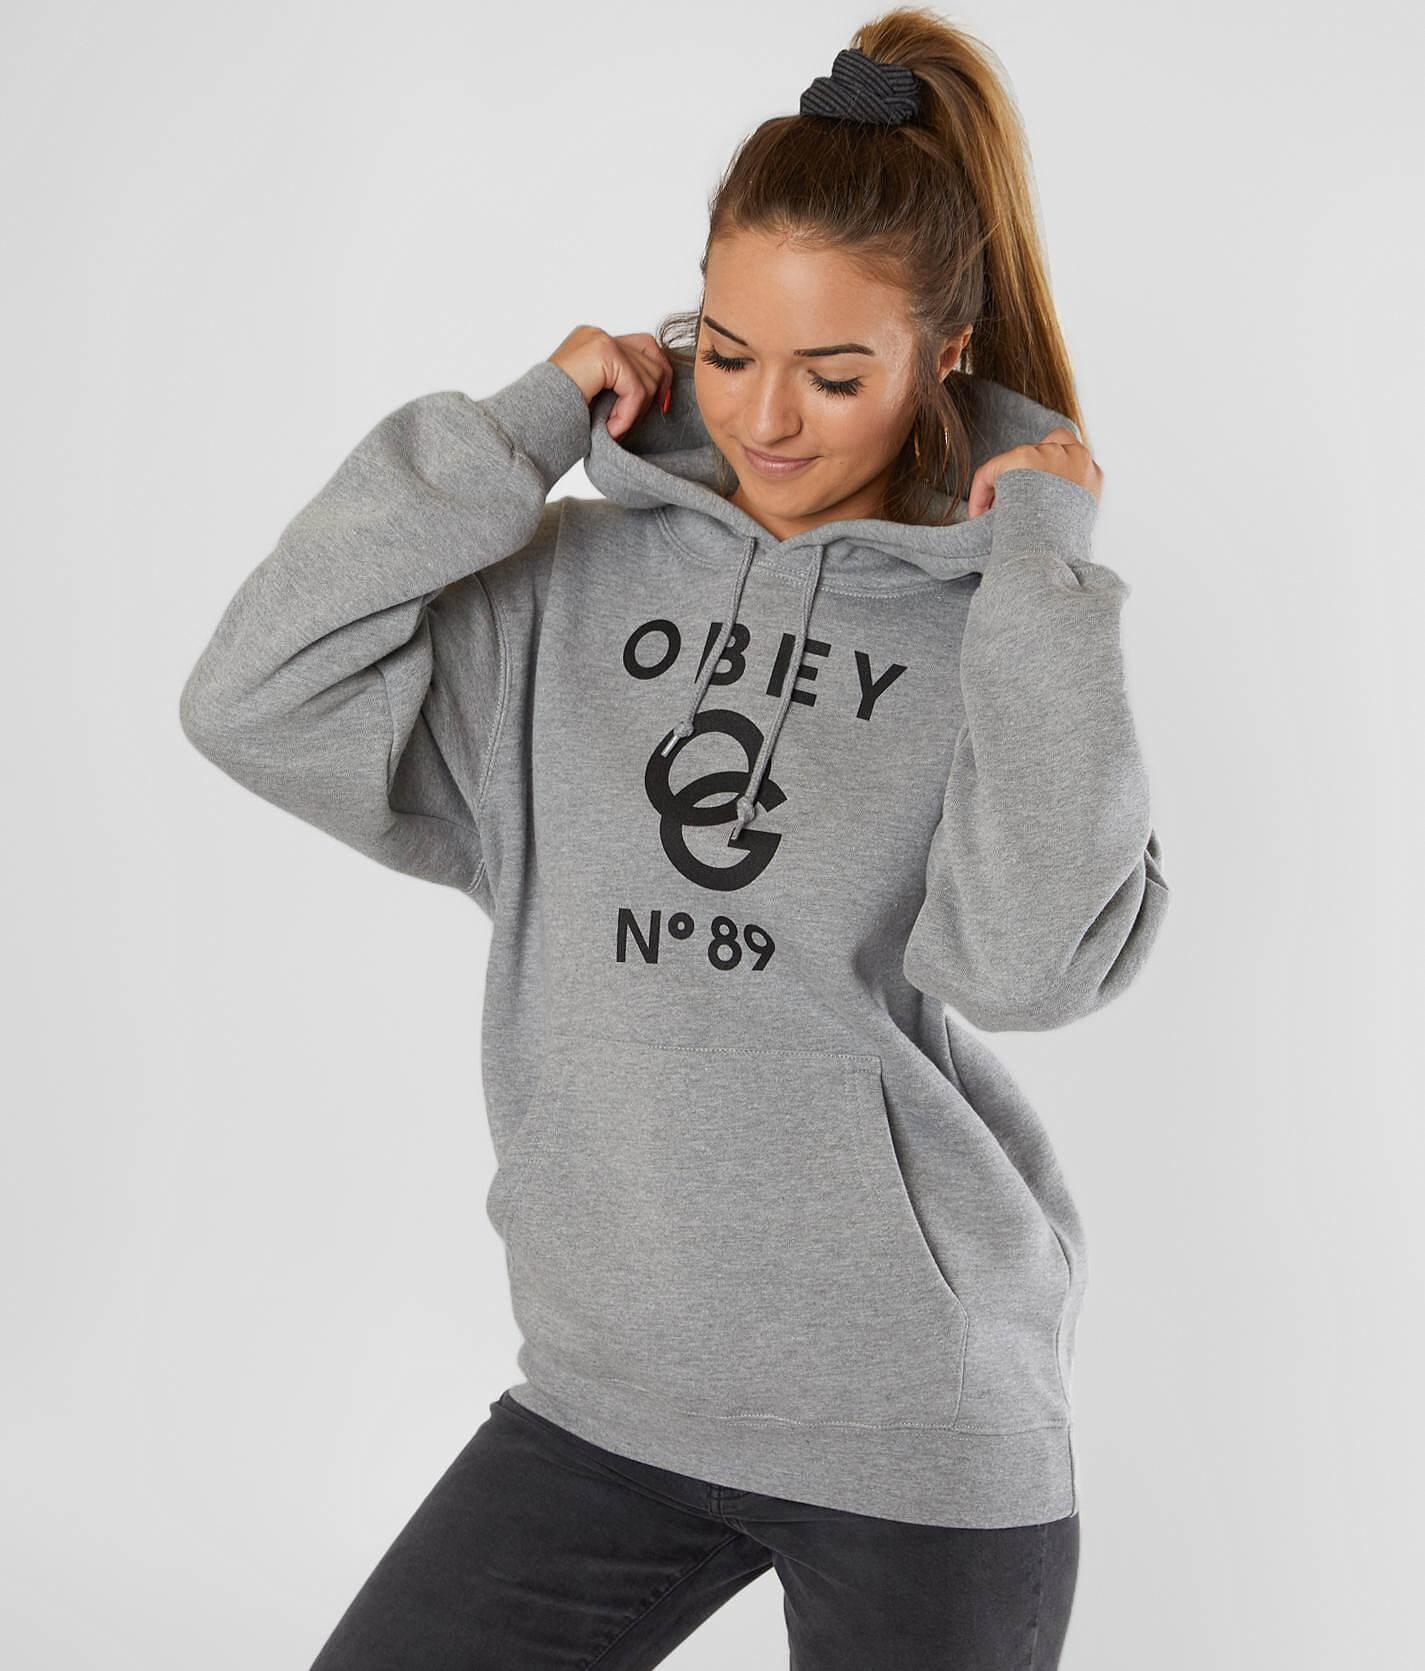 obey sweater womens